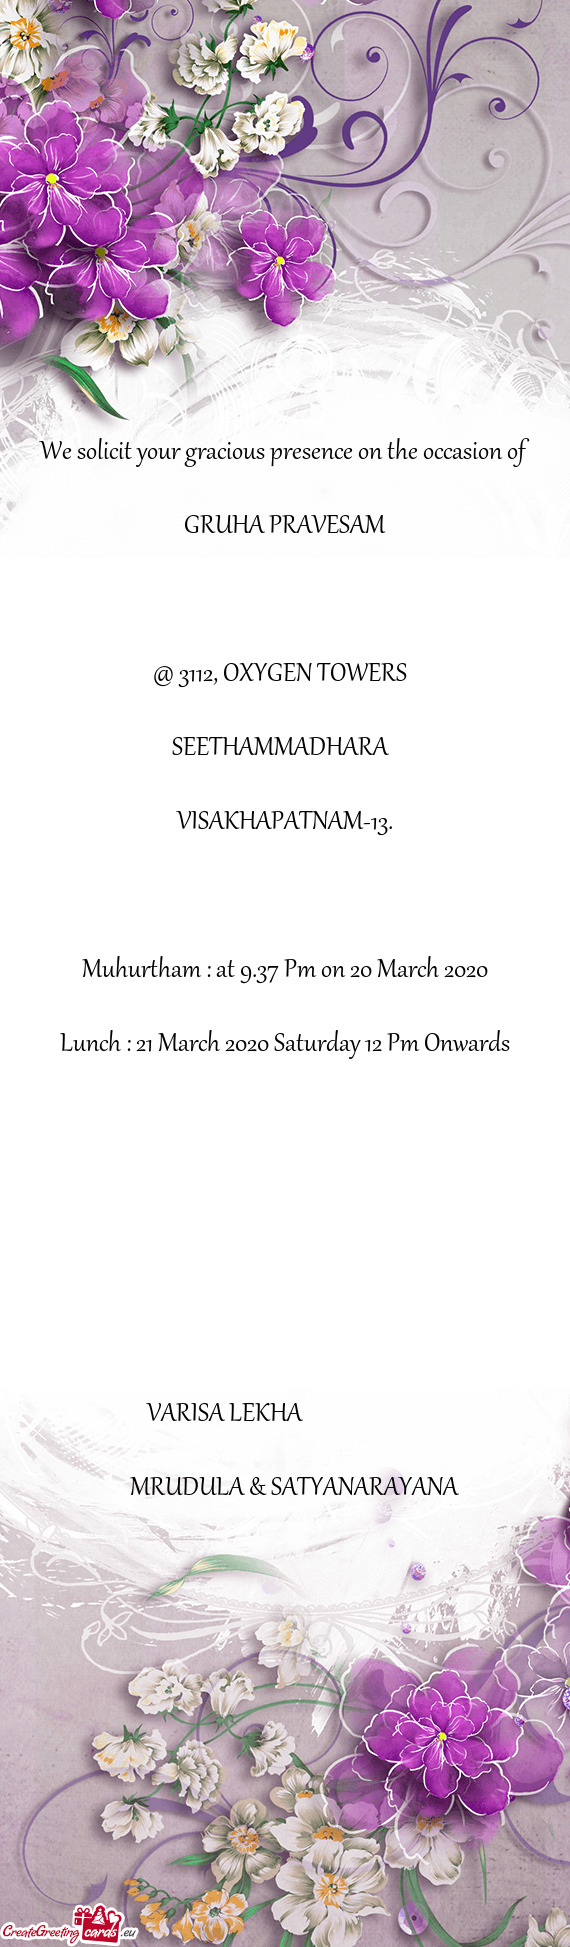 Muhurtham : at 9.37 Pm on 20 March 2020